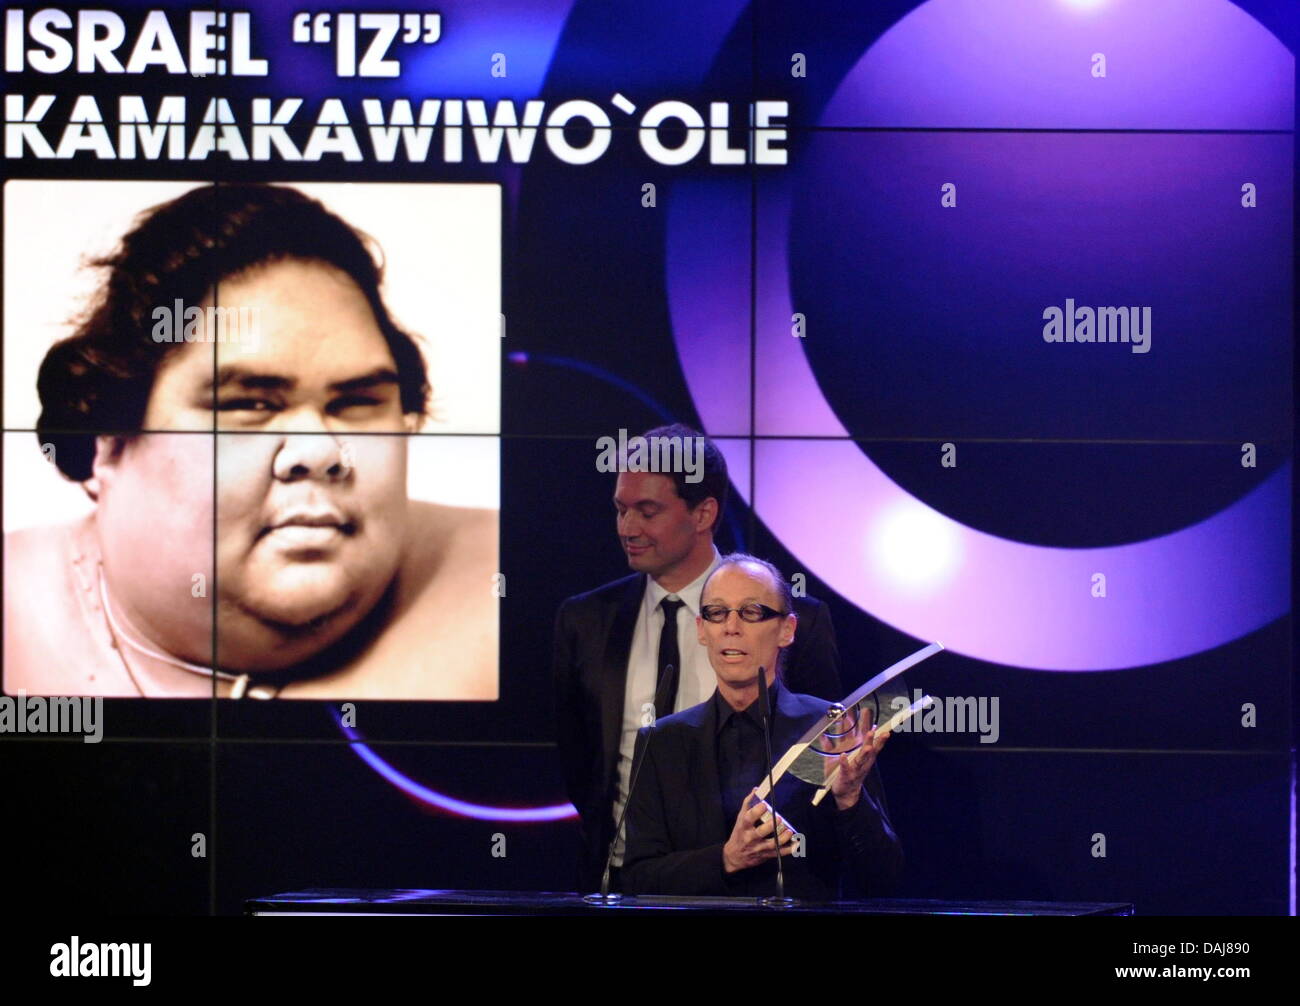 Producers Wolfgang Boss and John de Mello receive the 2011 Echo Music Award  in the category Song Of The Year for Hawaiian singer Israel Kamakawiwo'ole  at the 2011 Echo Music Awards ceremony